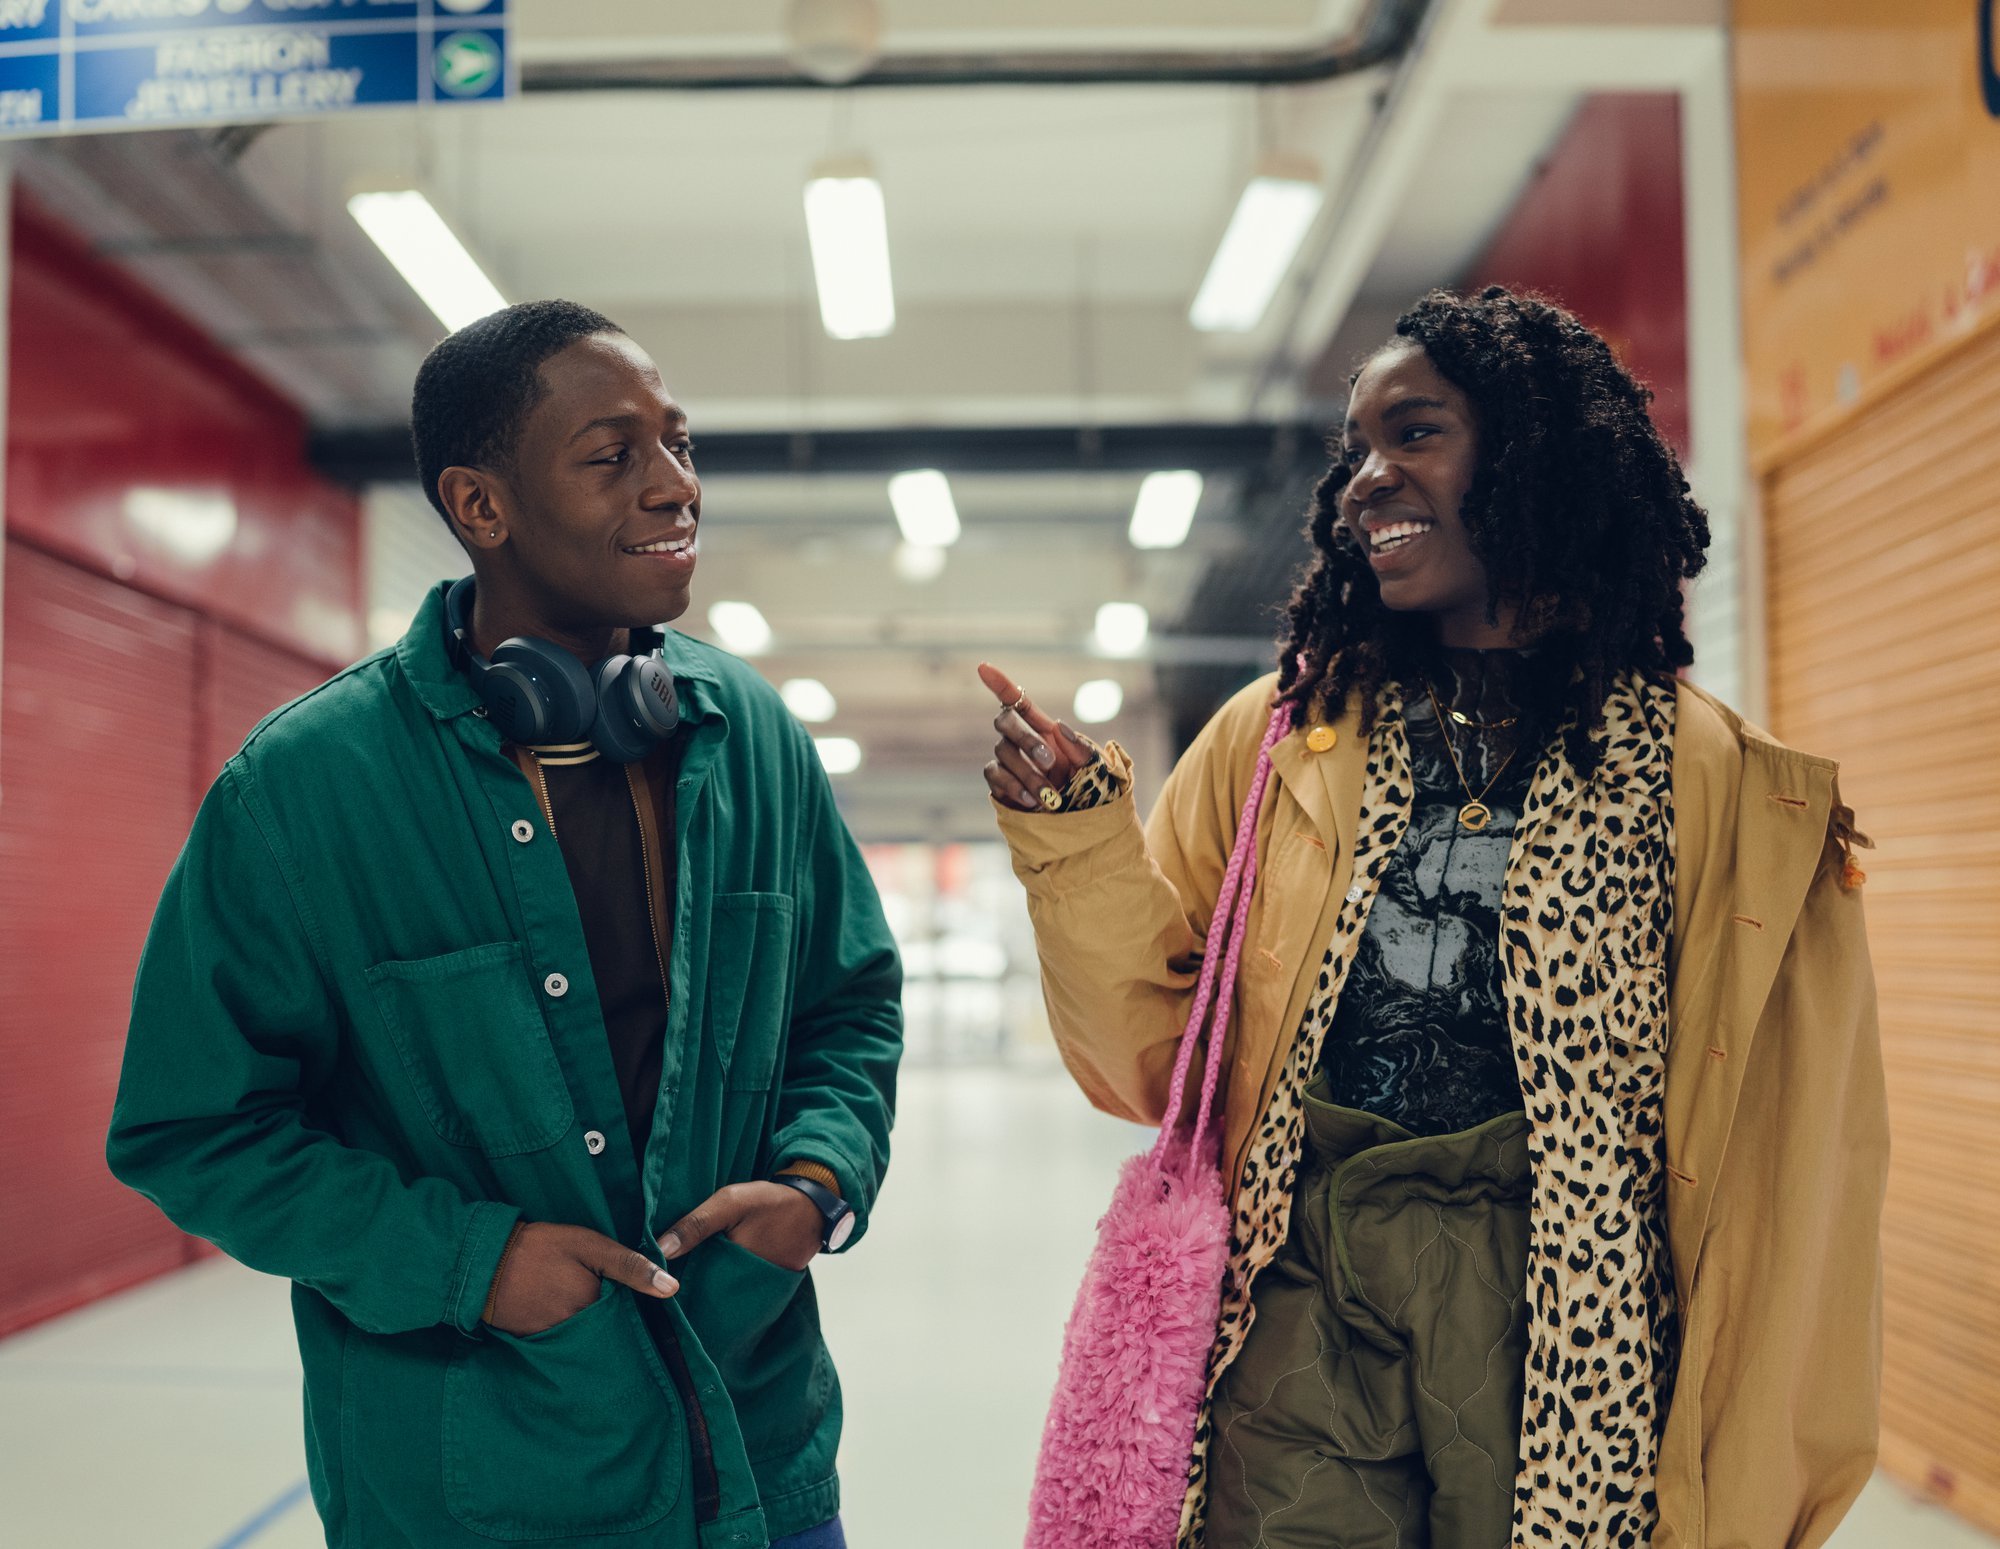 'Rye Lane' David Jonsson as Dom and Vivian Oparah as Yas walking down a long hallway while smiling. Yas is pointing at Dom.